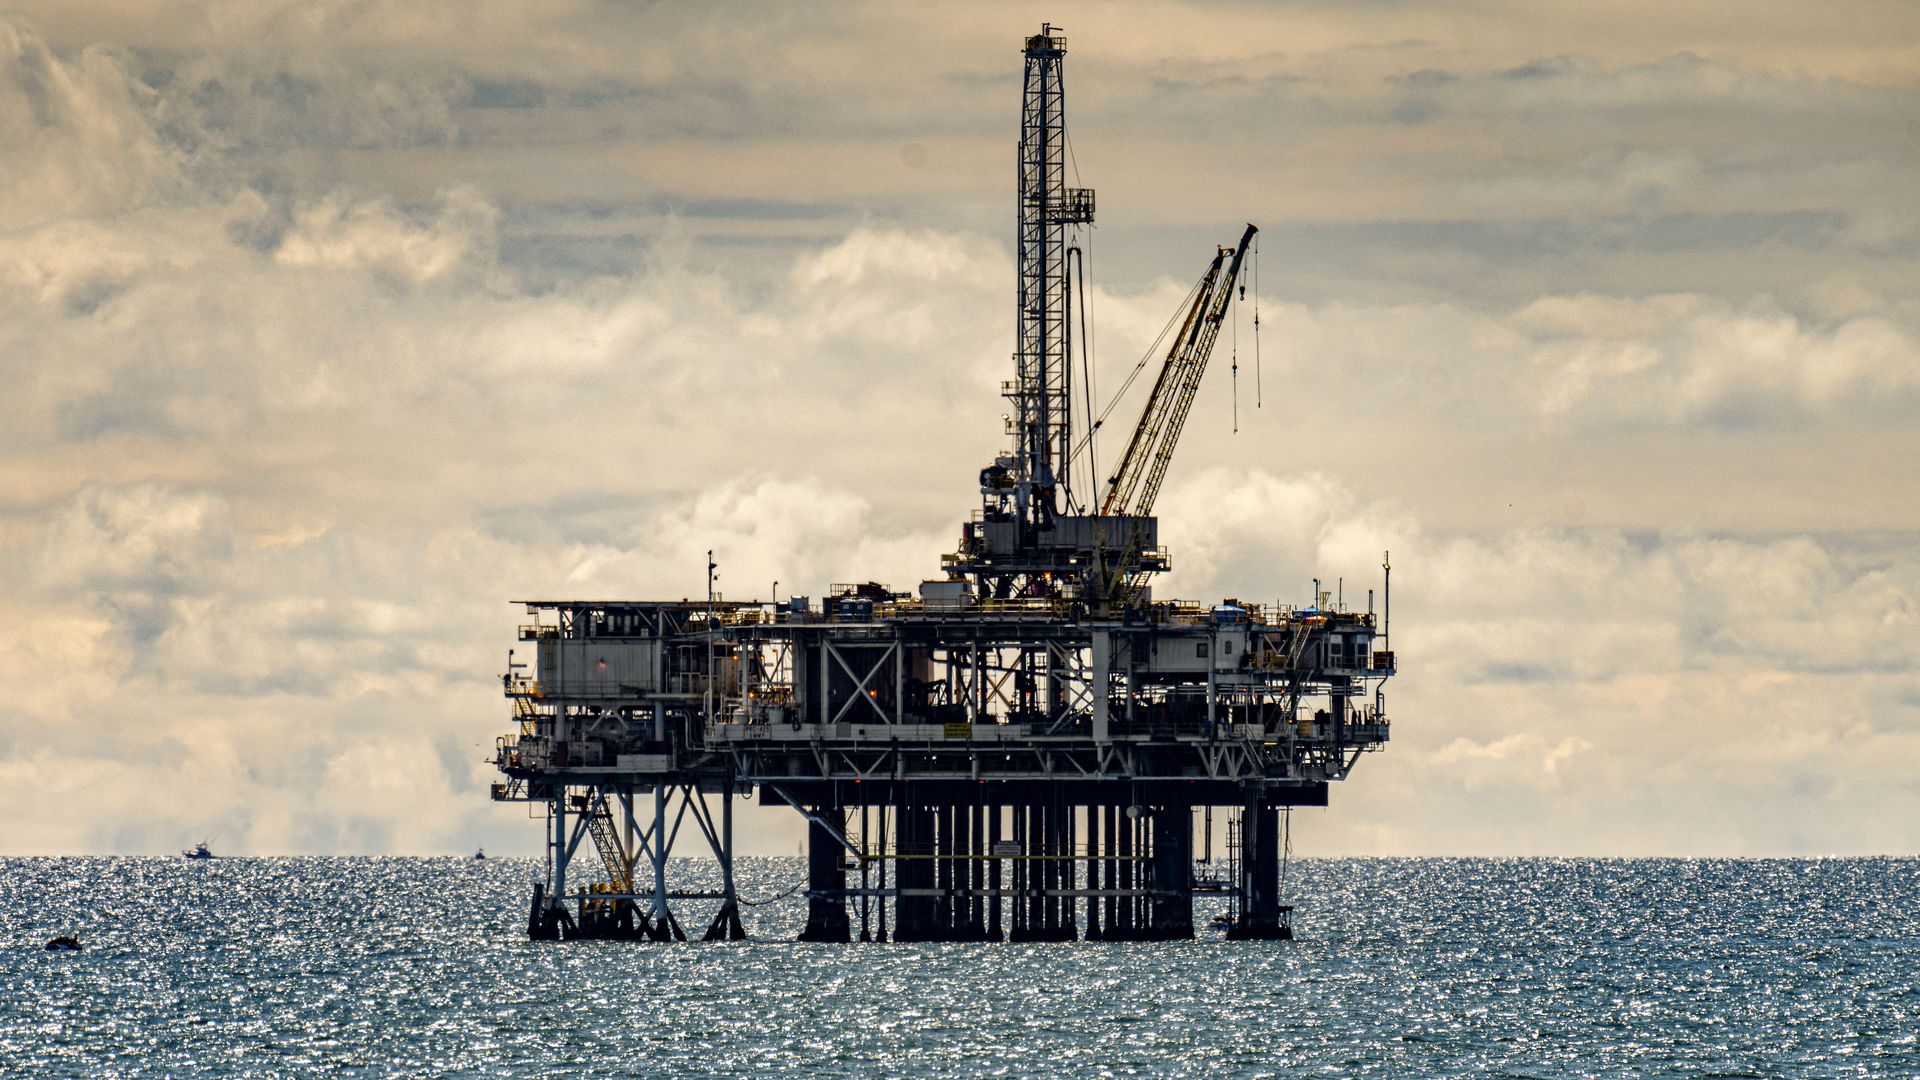 An off-shore oil platform in California. Photo: Omar Marques/SOPA Images/LightRocket via Getty Images